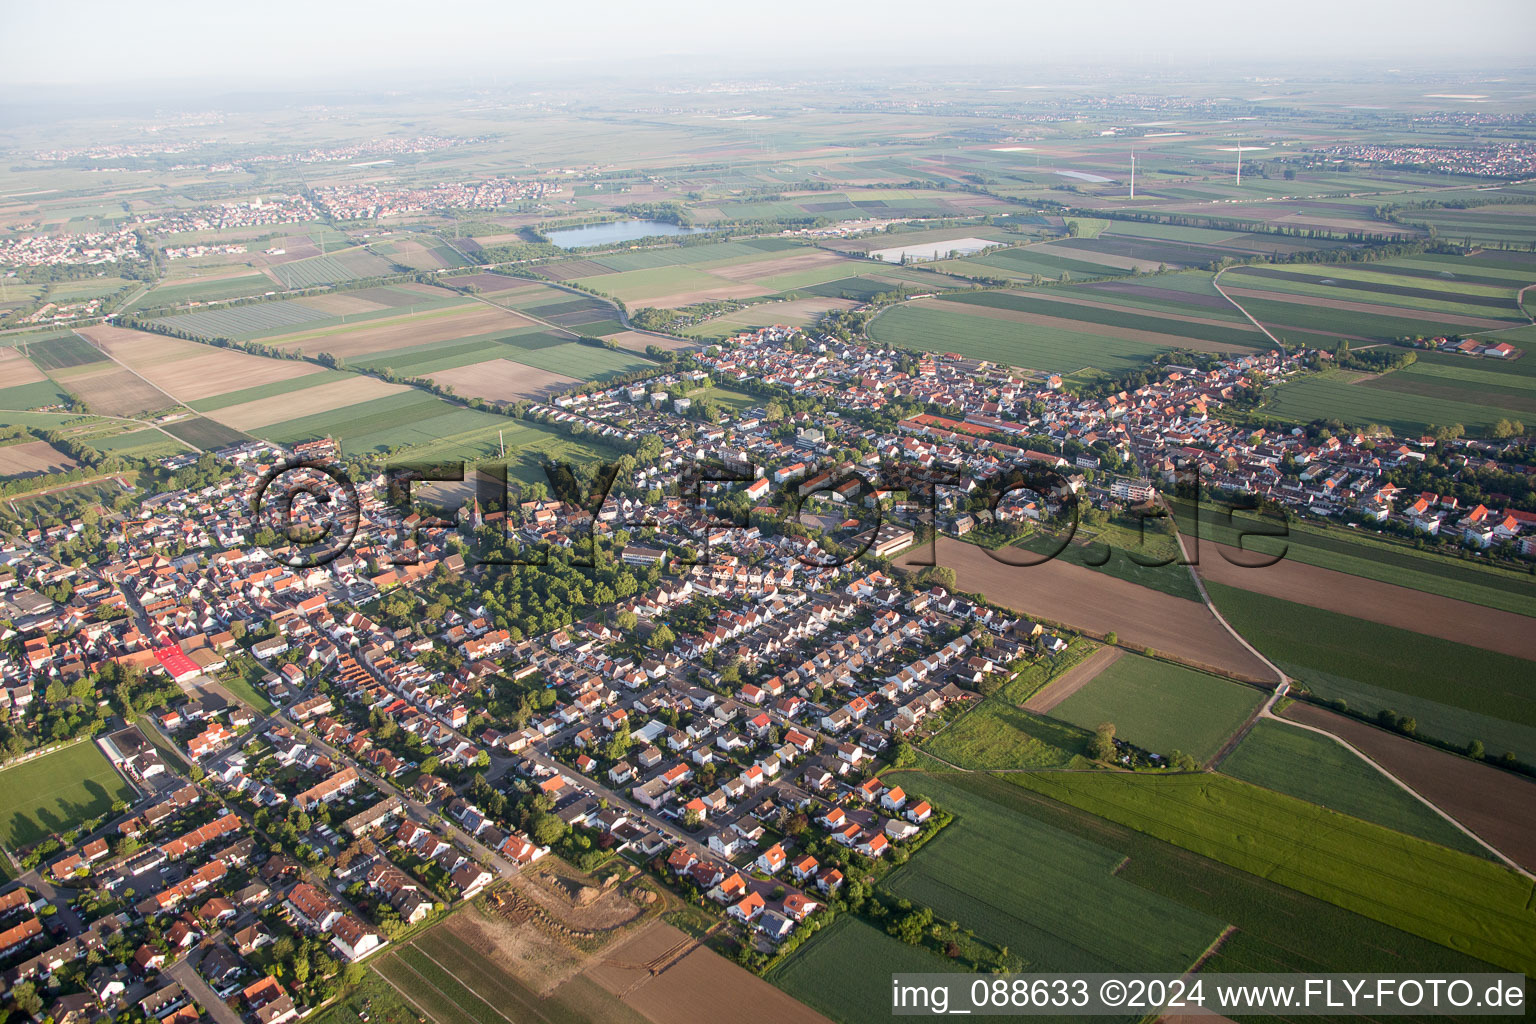 Village - view on the edge of agricultural fields and farmland in the district Flomersheim in Frankenthal (Pfalz) in the state Rhineland-Palatinate, Germany